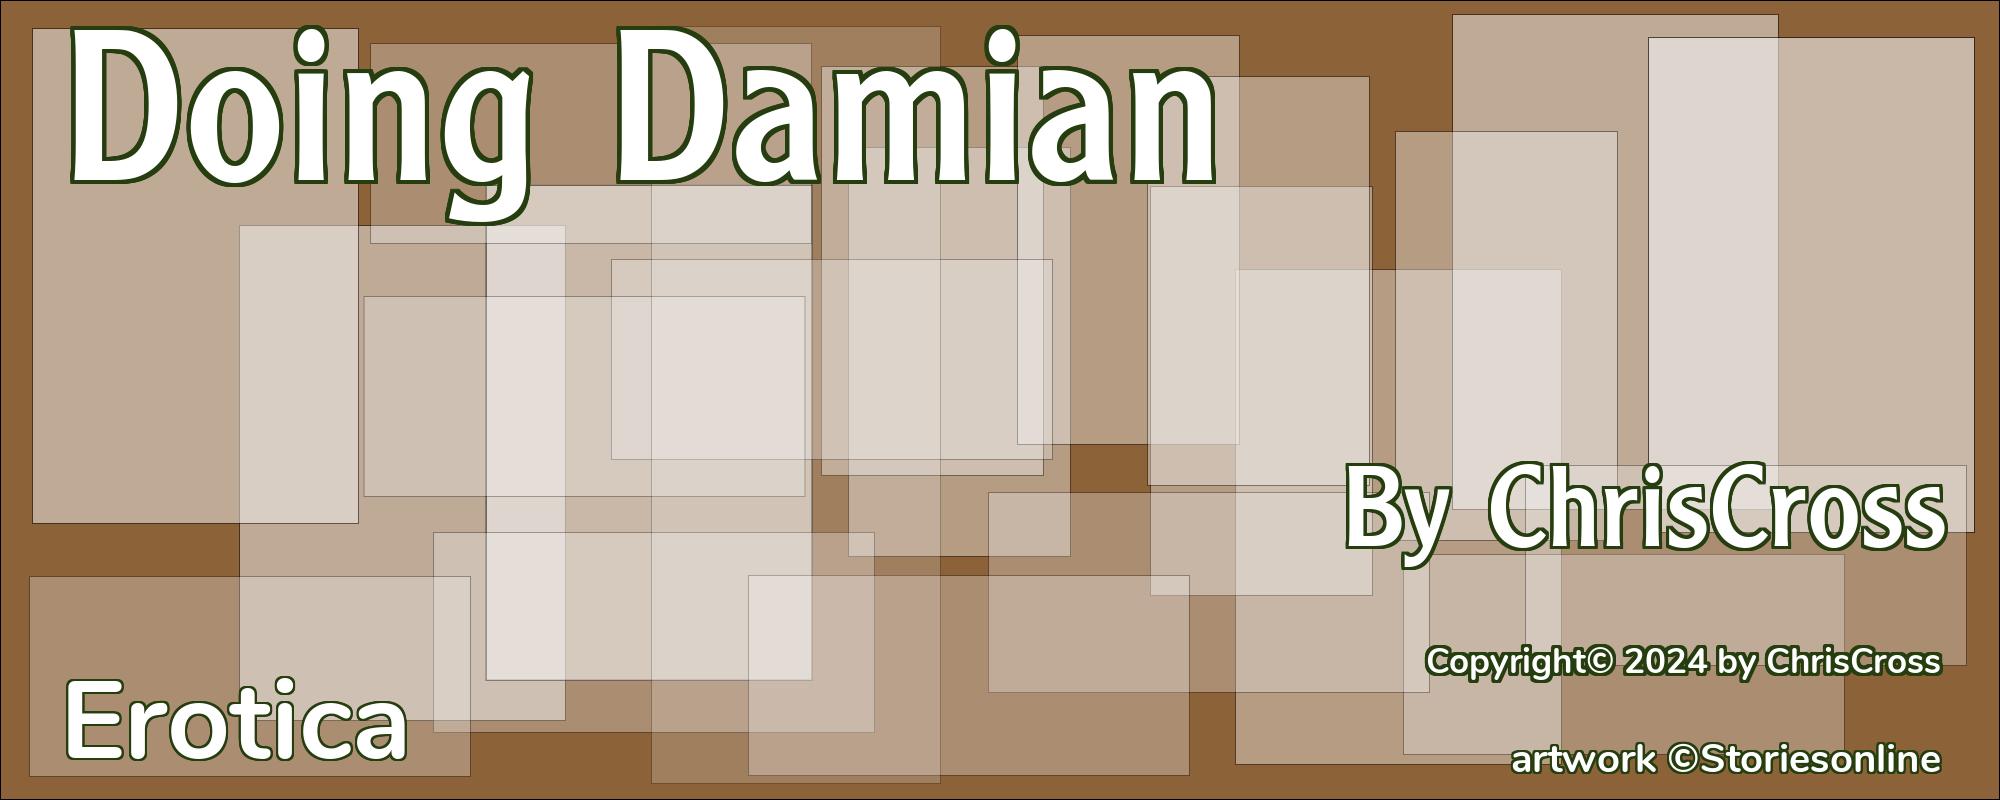 Doing Damian - Cover